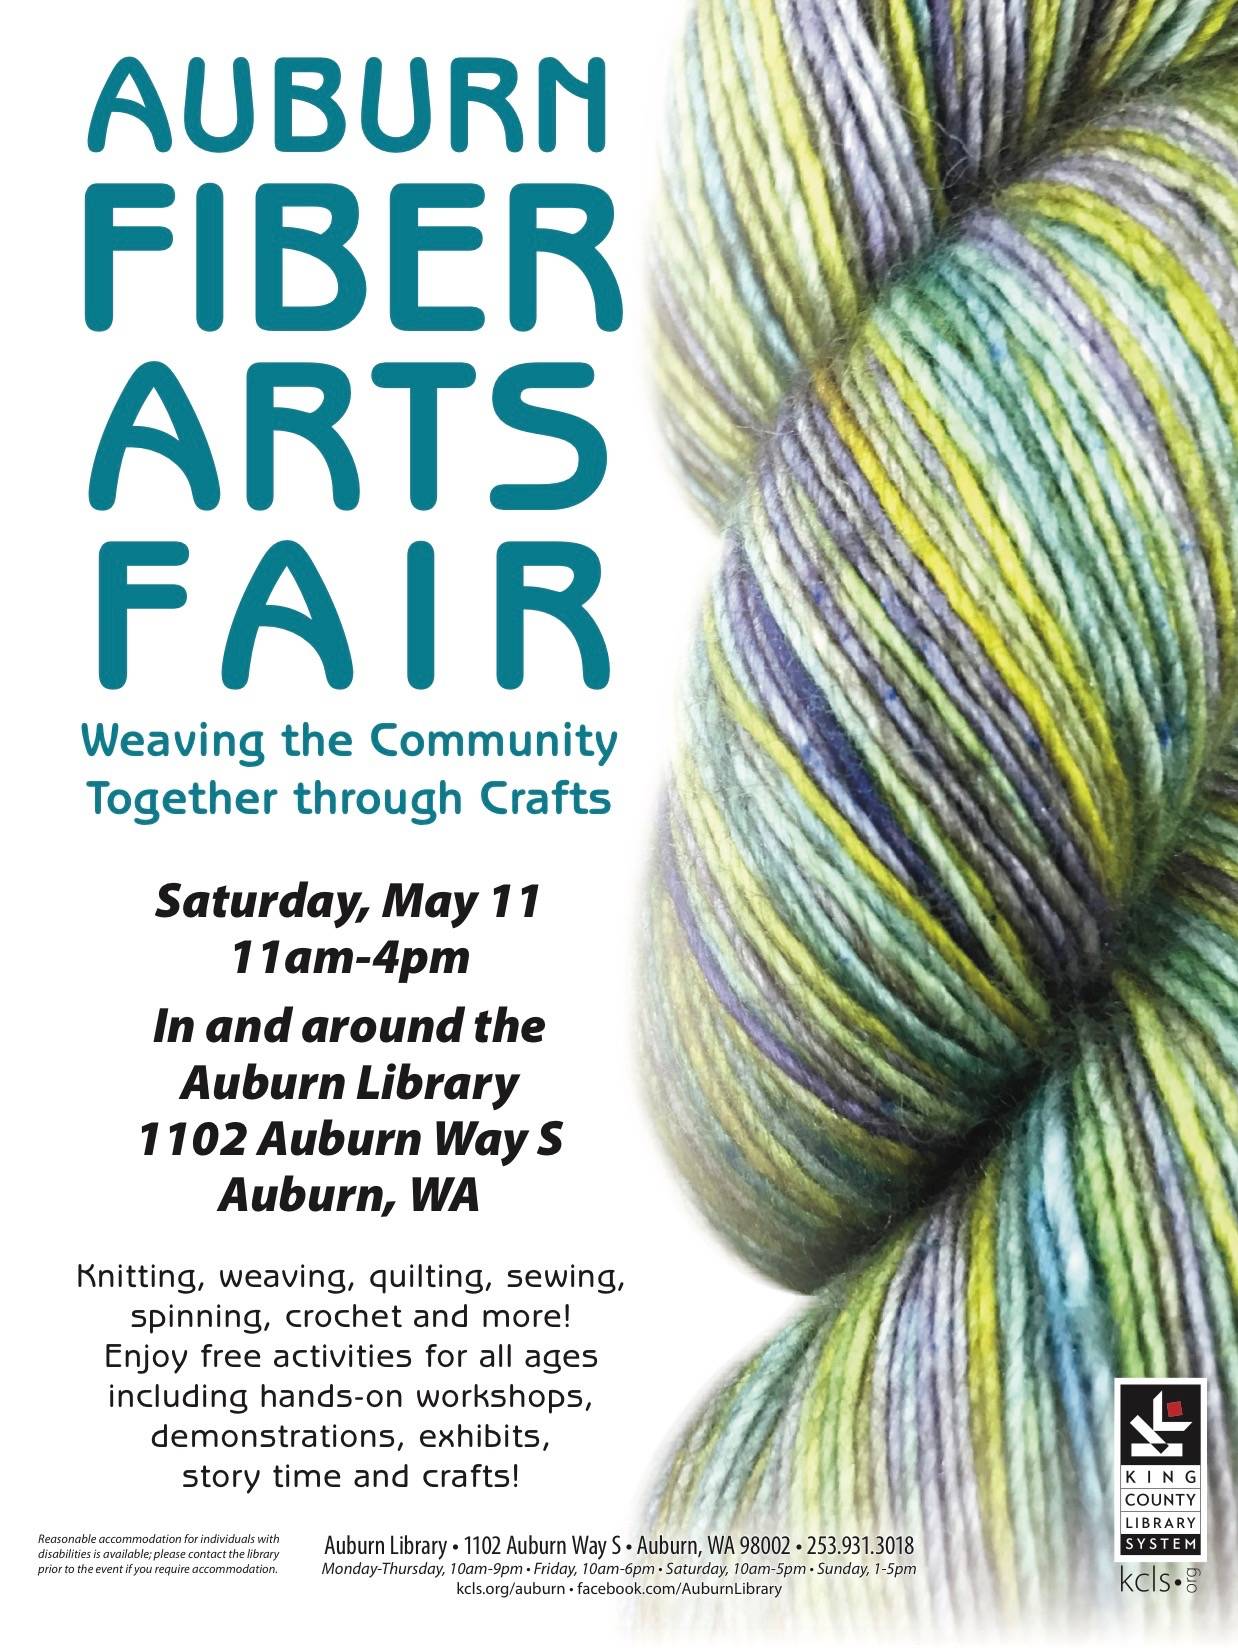 Fiber Arts Fair comes to the Auburn Library on May 11